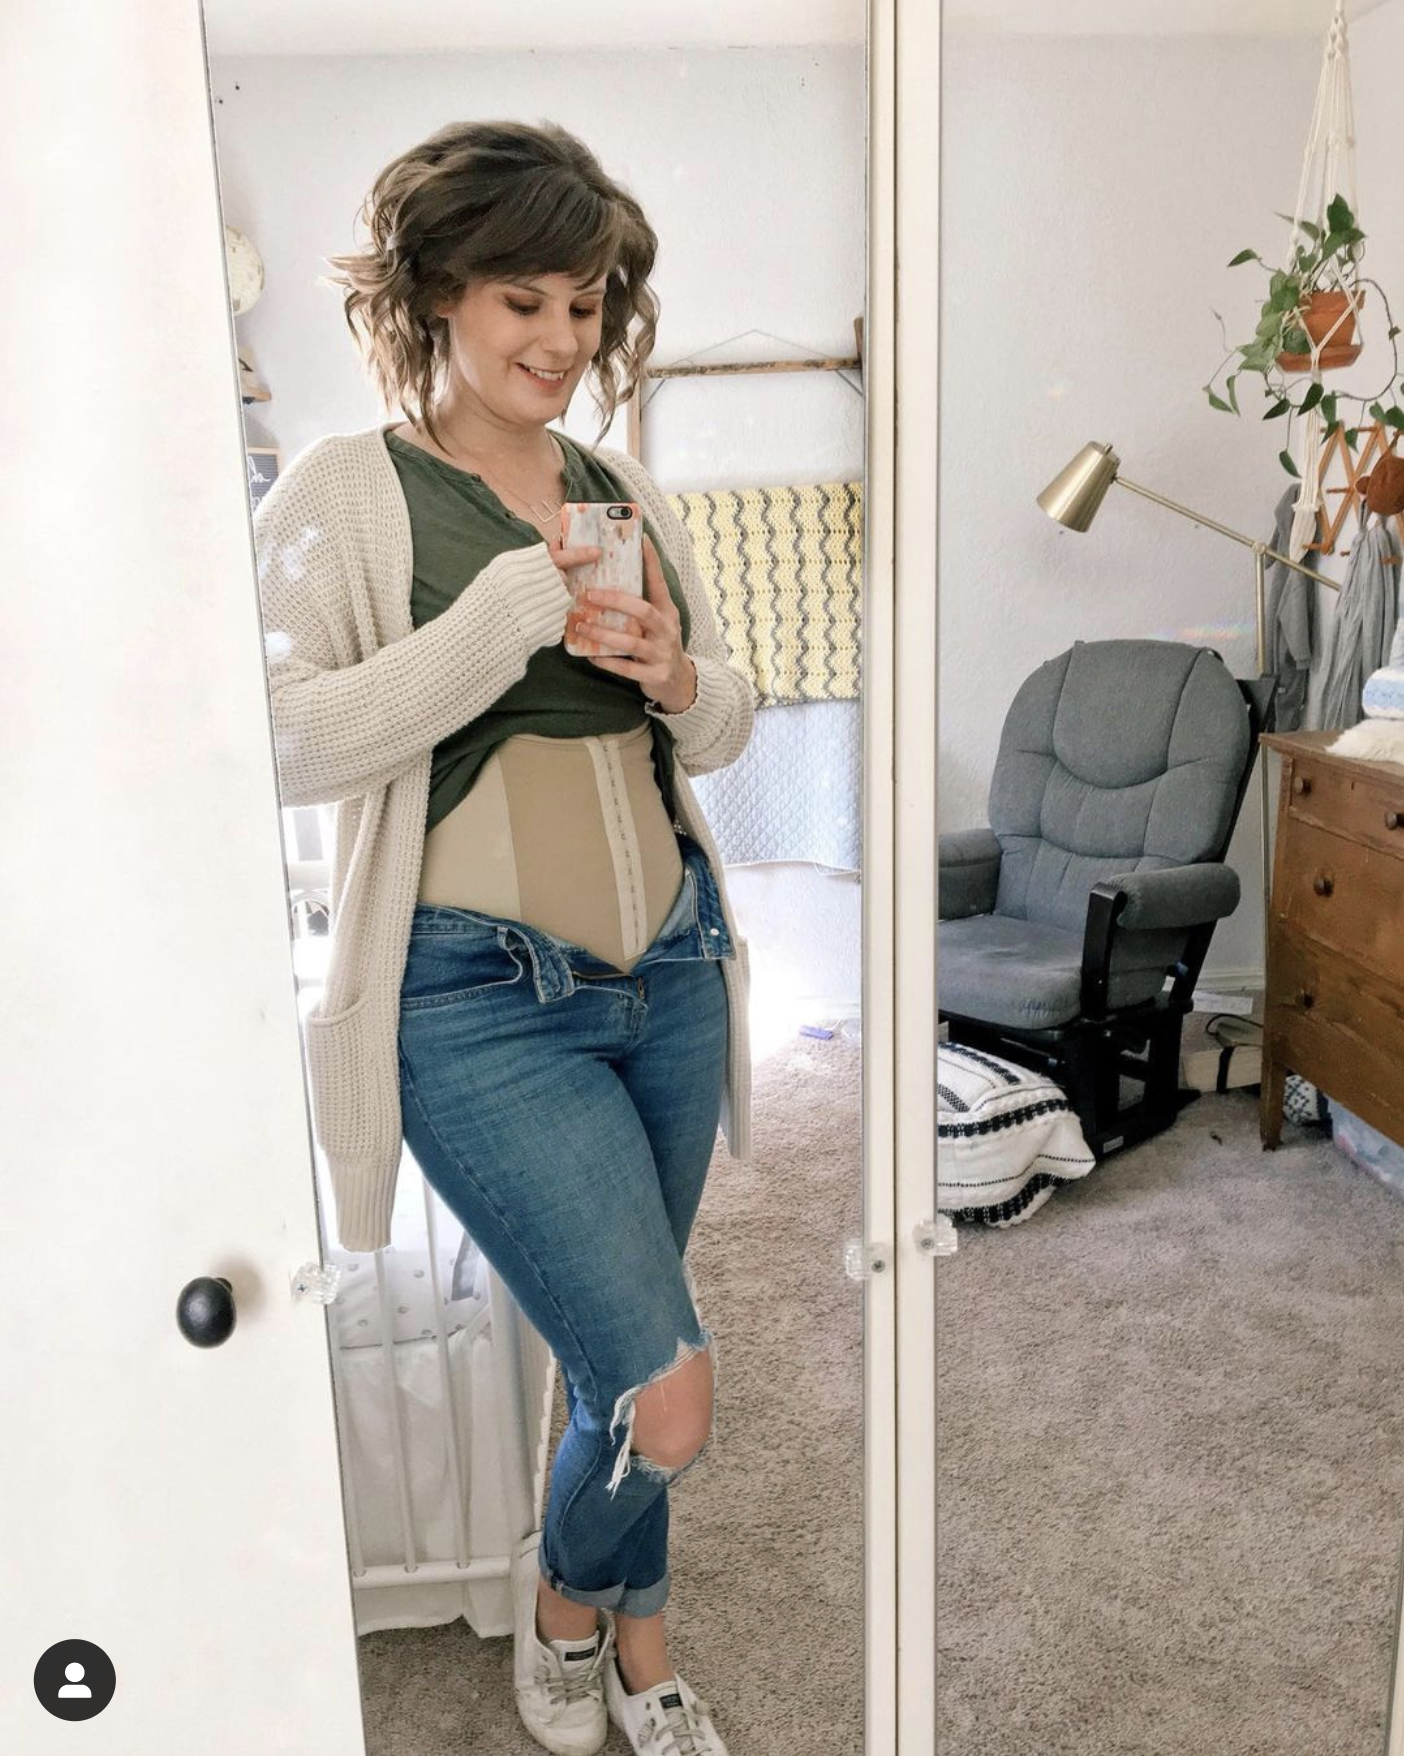 woman standing by crib with a rocking chair in the background. She is wearing jeans. Her shirt is pulled up to show her postpartum wrapping.